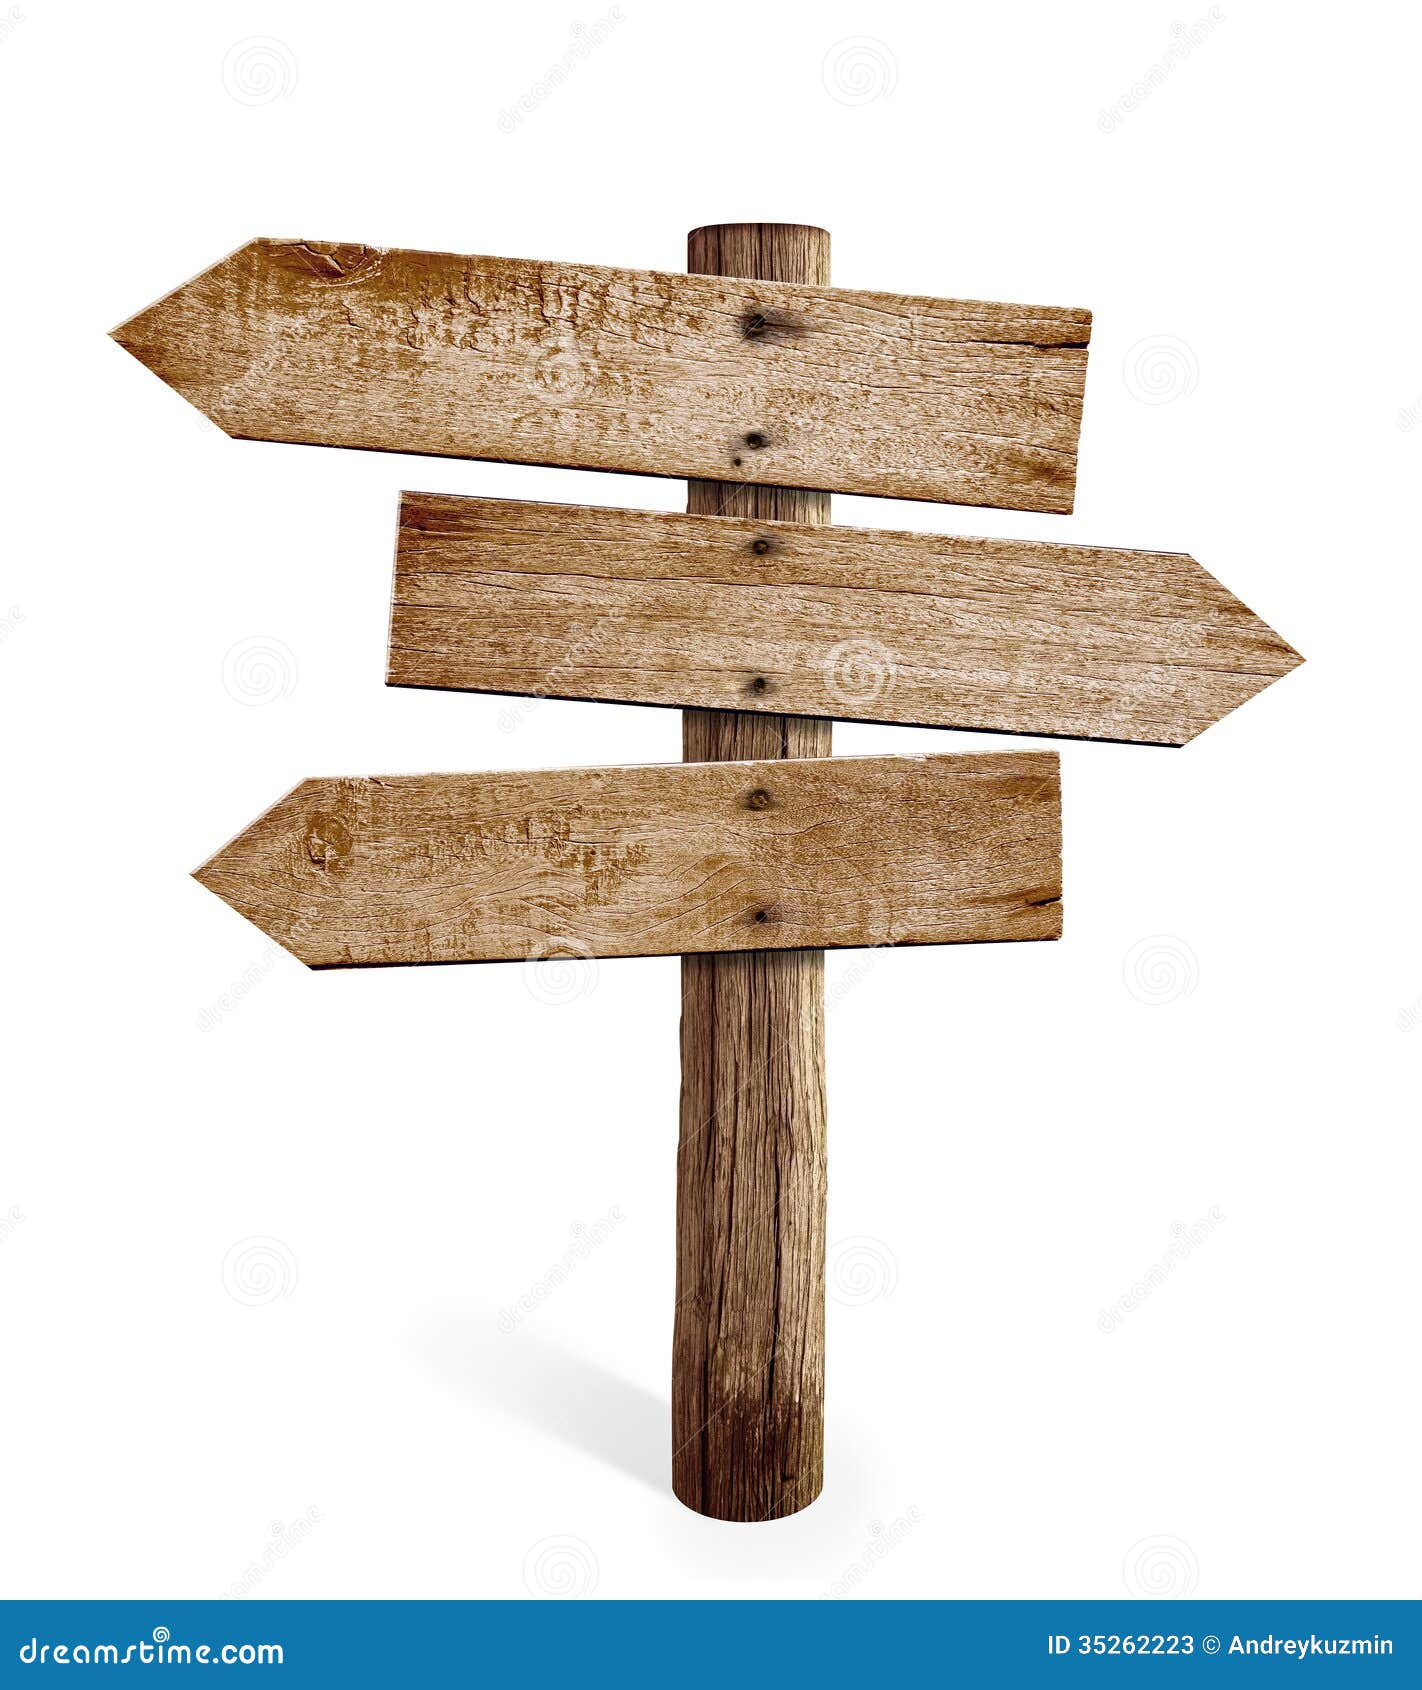 wooden arrow sign post or road signpost 